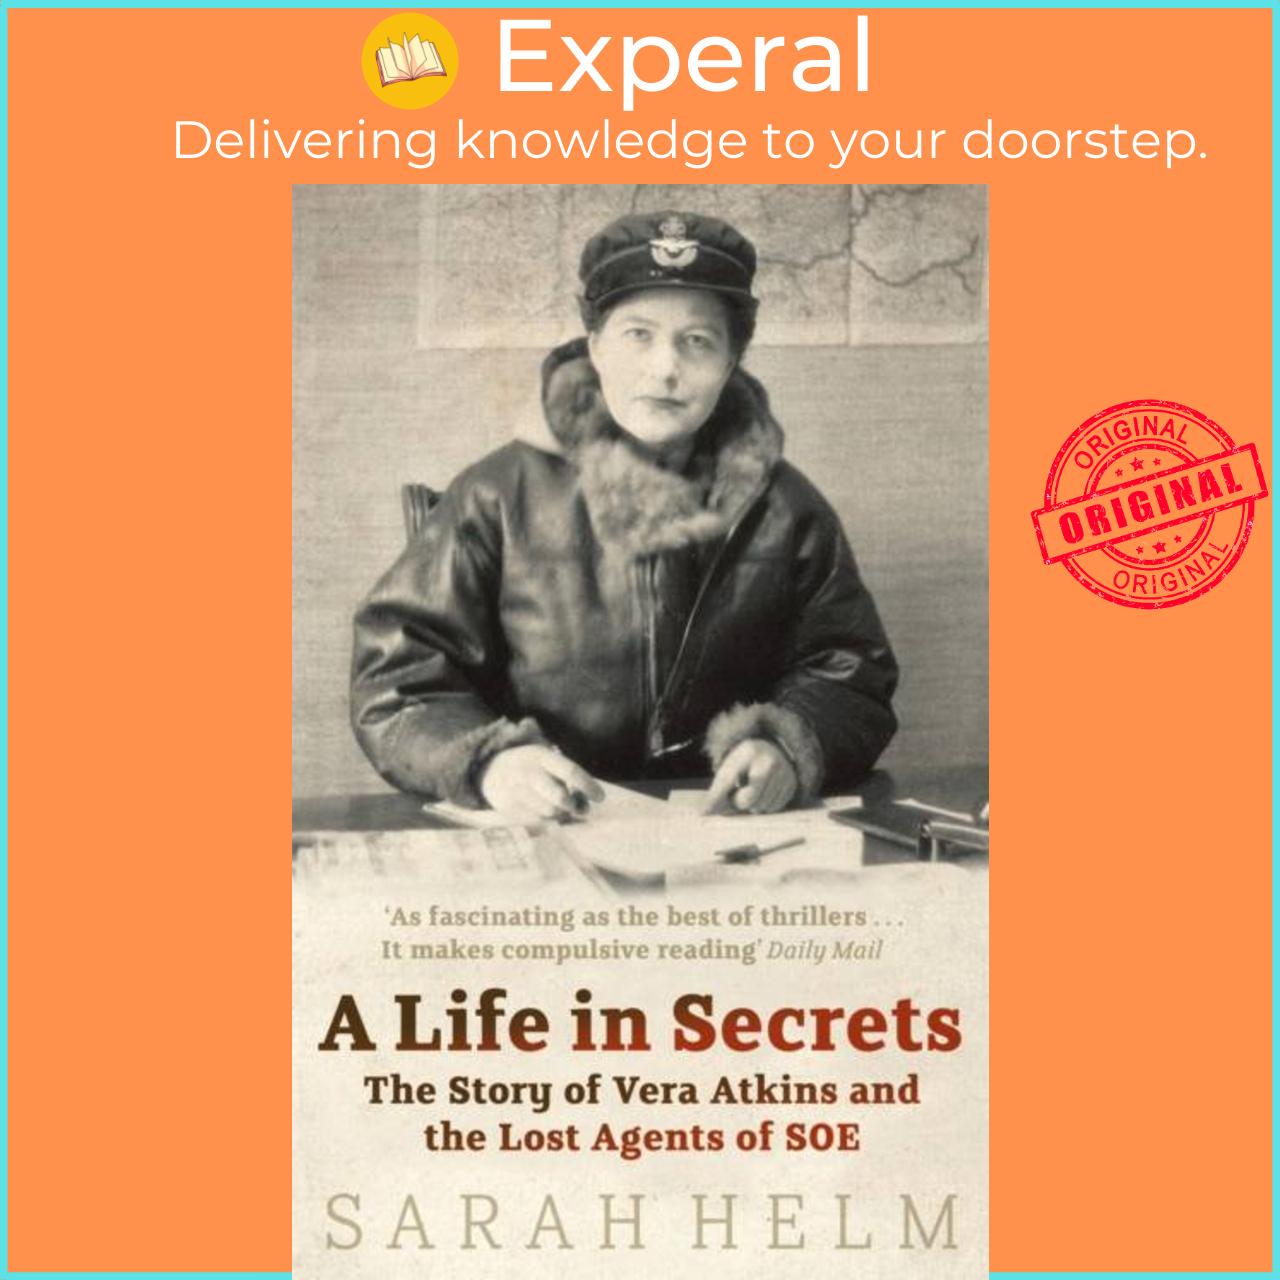 Hình ảnh Sách - A Life In Secrets - Vera Atkins and the Lost Agents of SOE by Sarah Helm (UK edition, paperback)